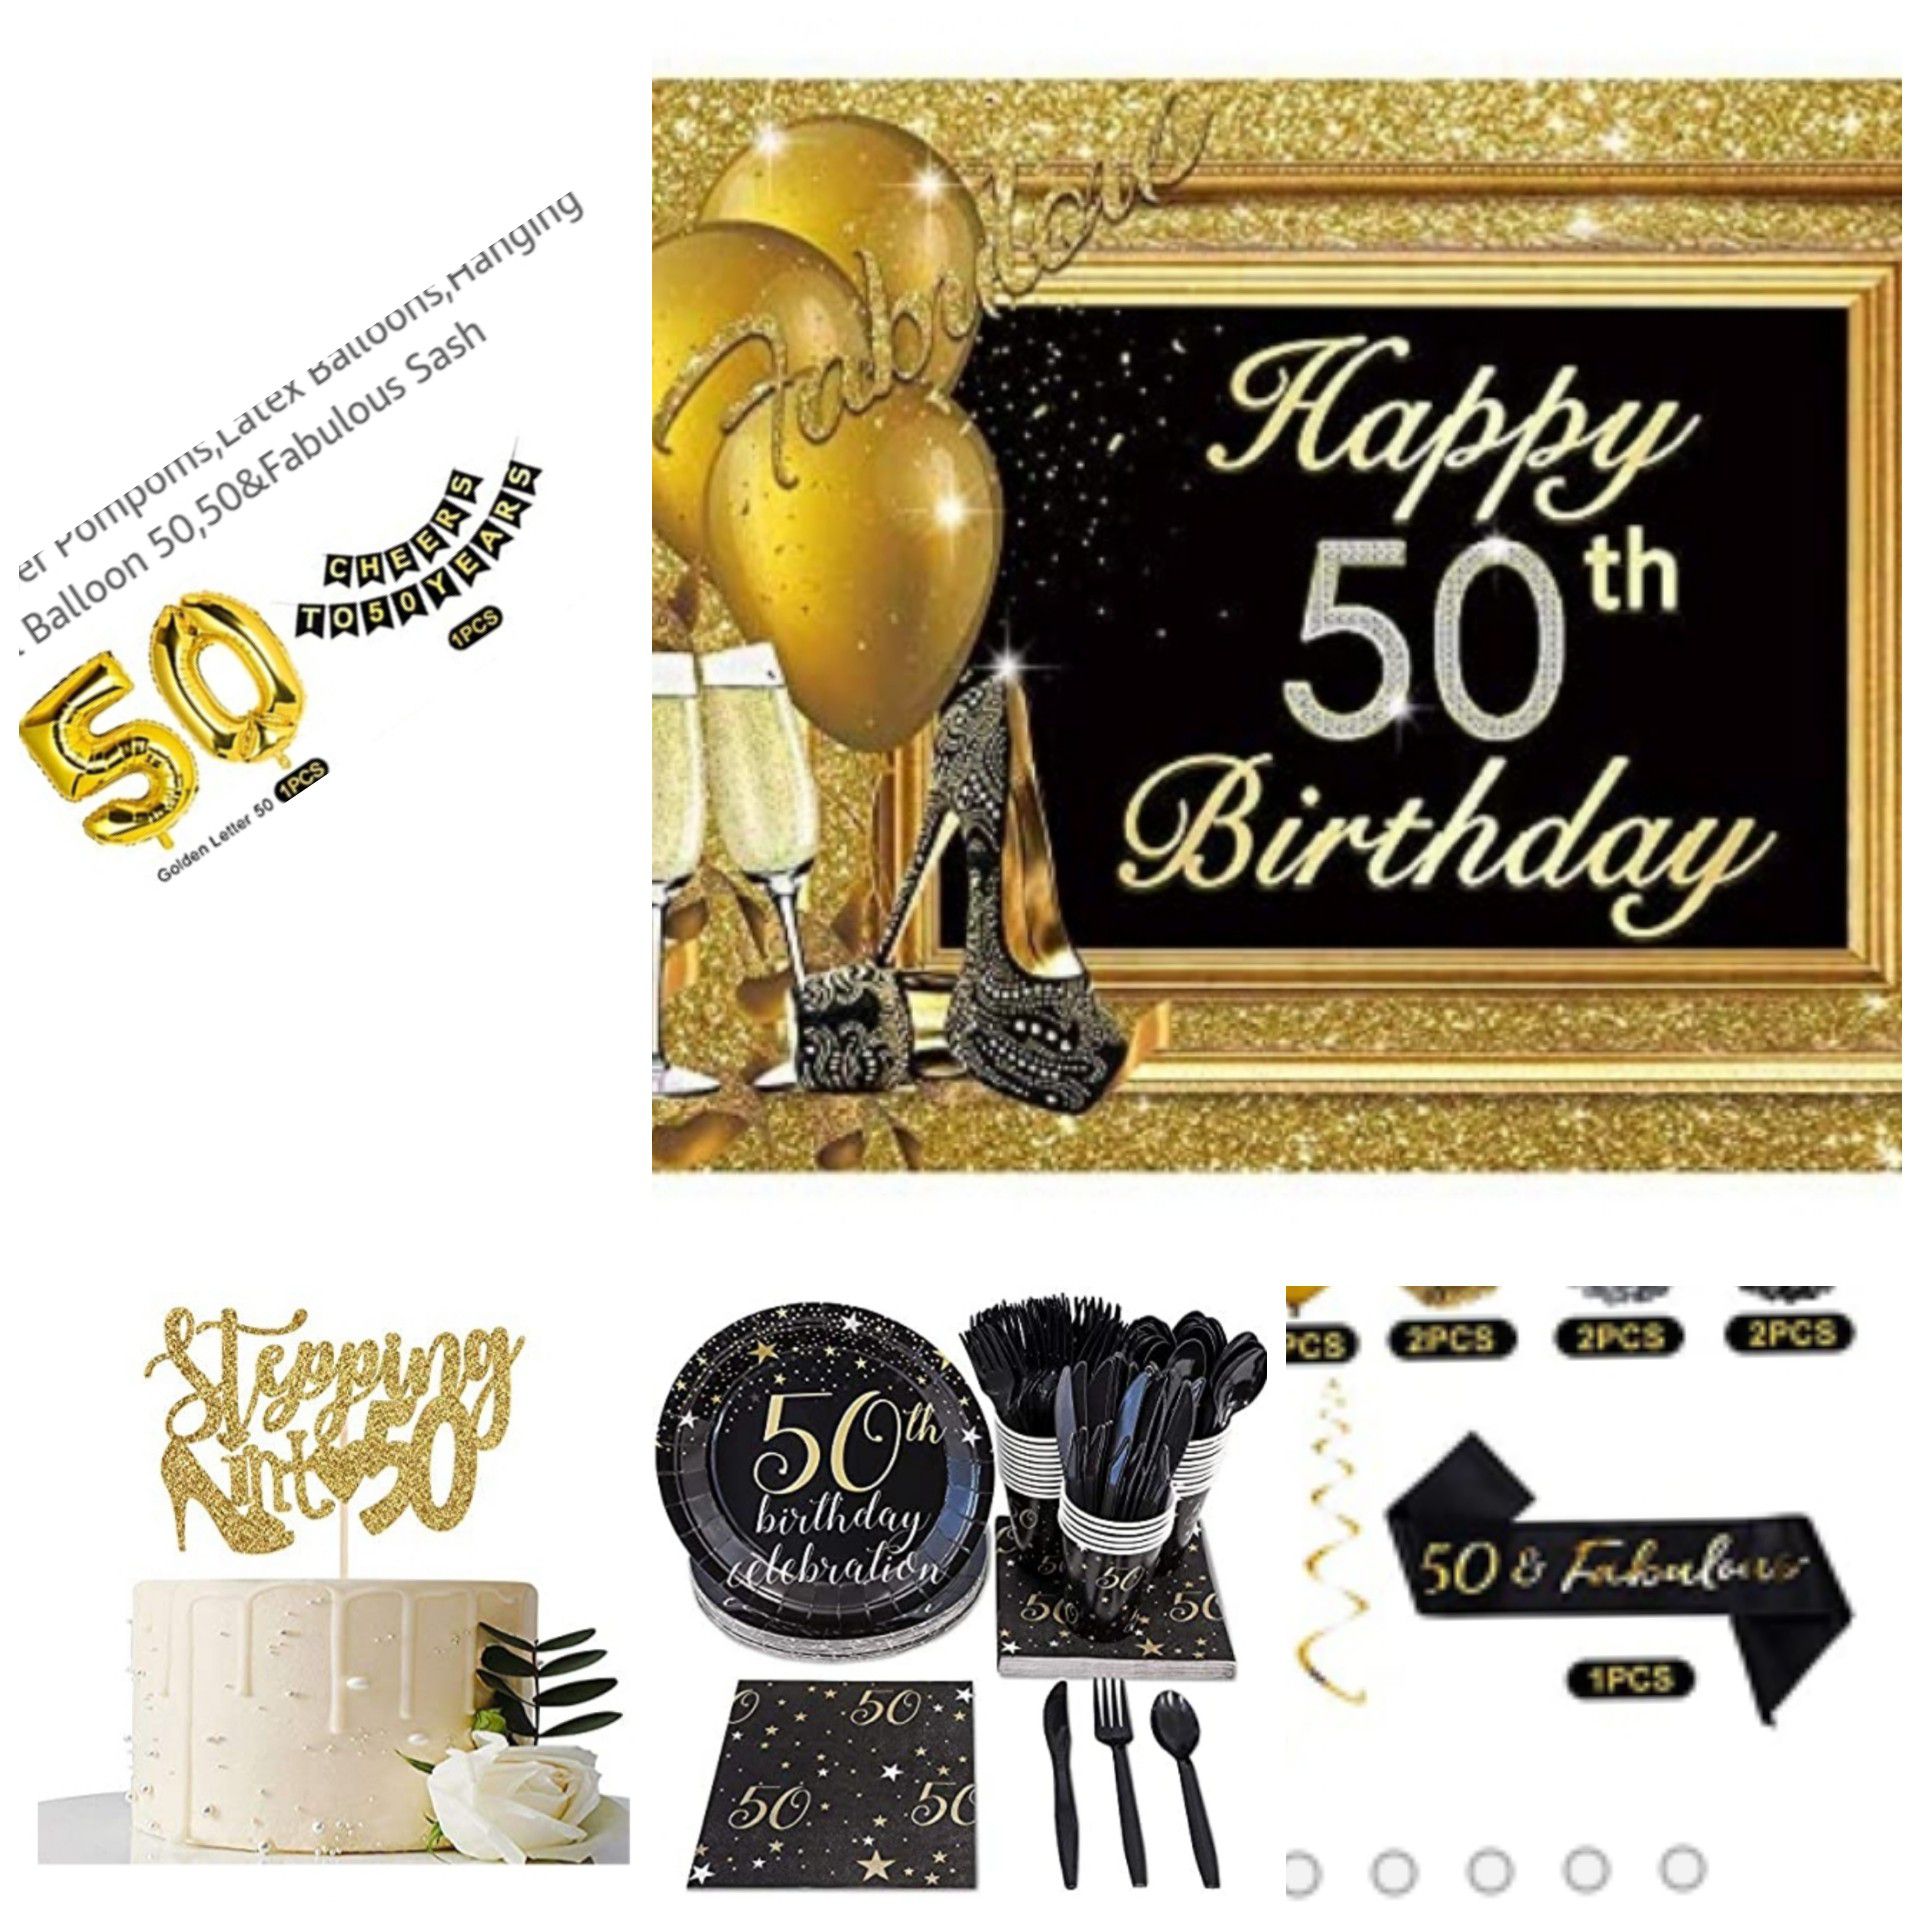 Gold and Black(50th) birthday decorations for a woman